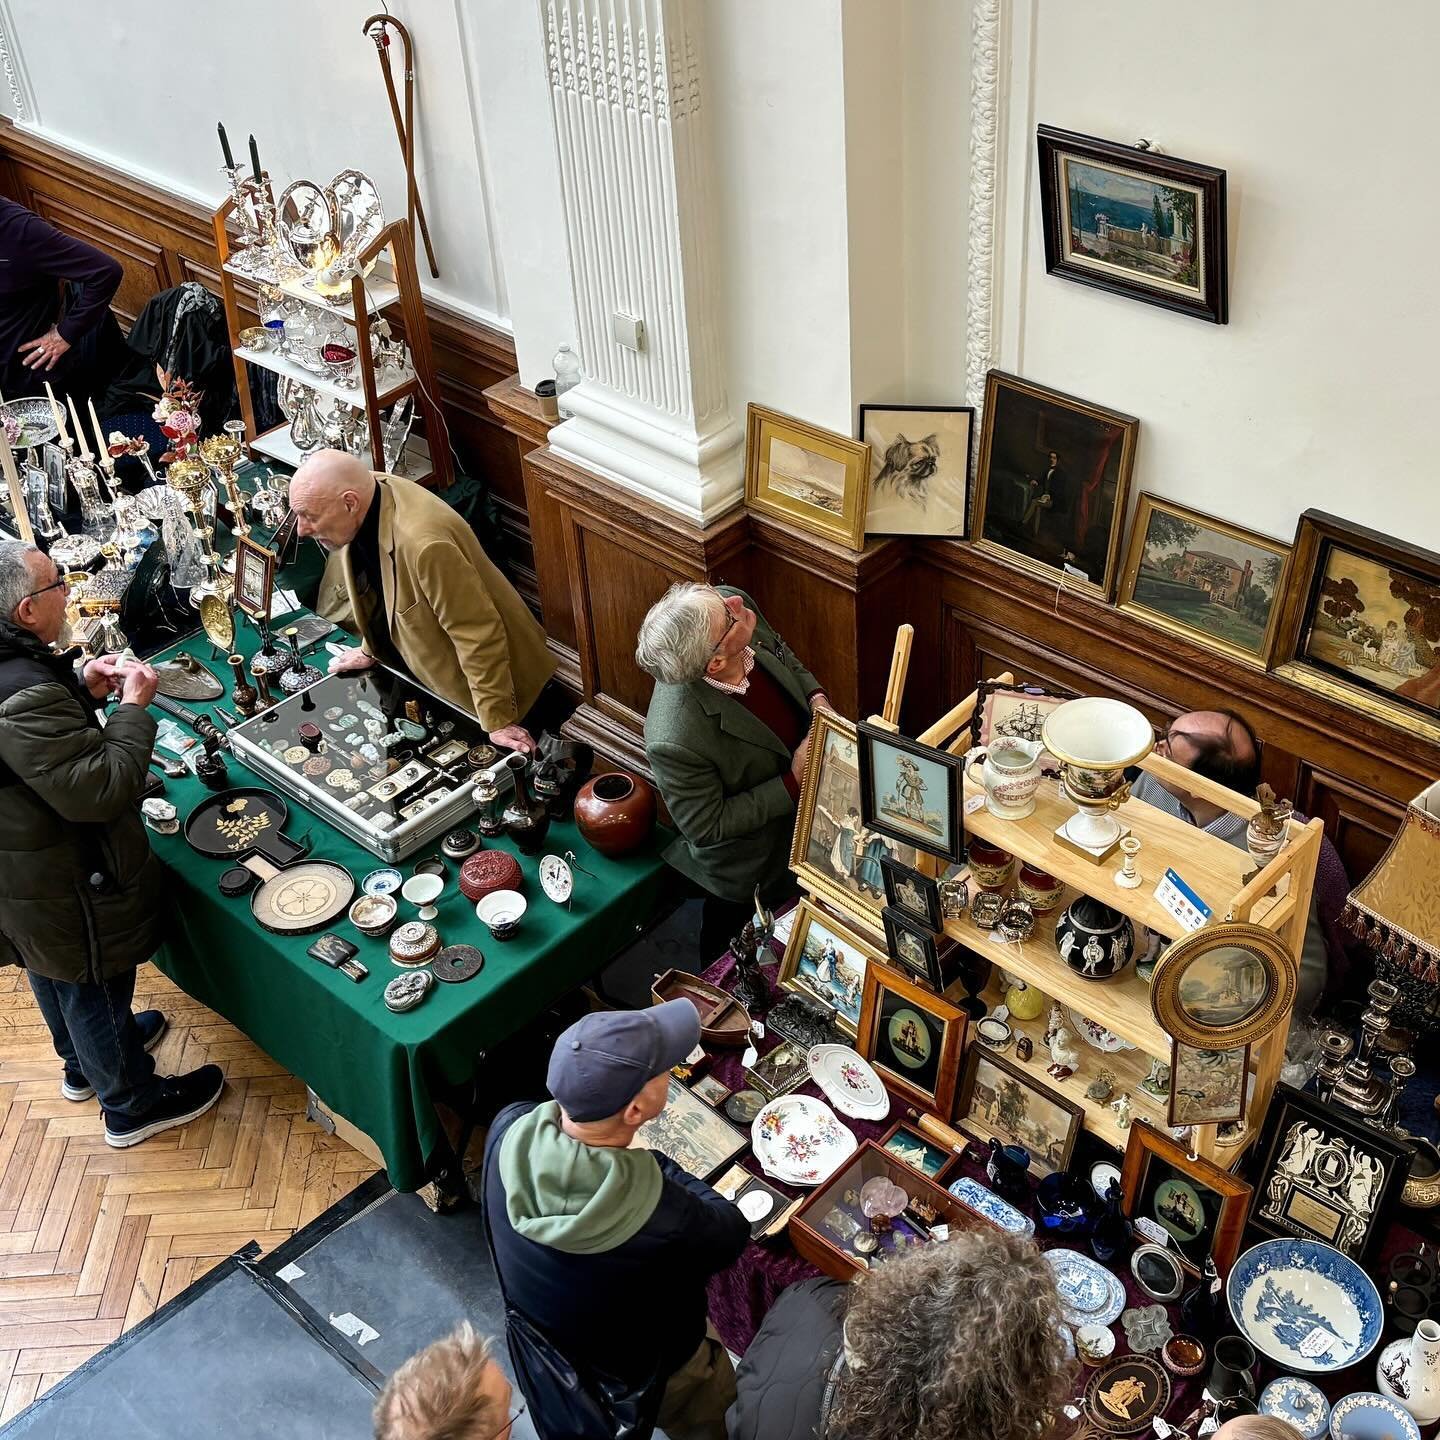 THIS SUNDAY 🌿 Adams Antiques Fairs at The Royal Horticultural Halls

Sunday 21st April
10am - 4.30pm
The Royal Horticultural Halls
Elverton Street, SW1

Advance tickets &gt;&gt; linked in bio
https://HortiApril2024.eventbrite.co.uk

🚇 Victoria/ Pim